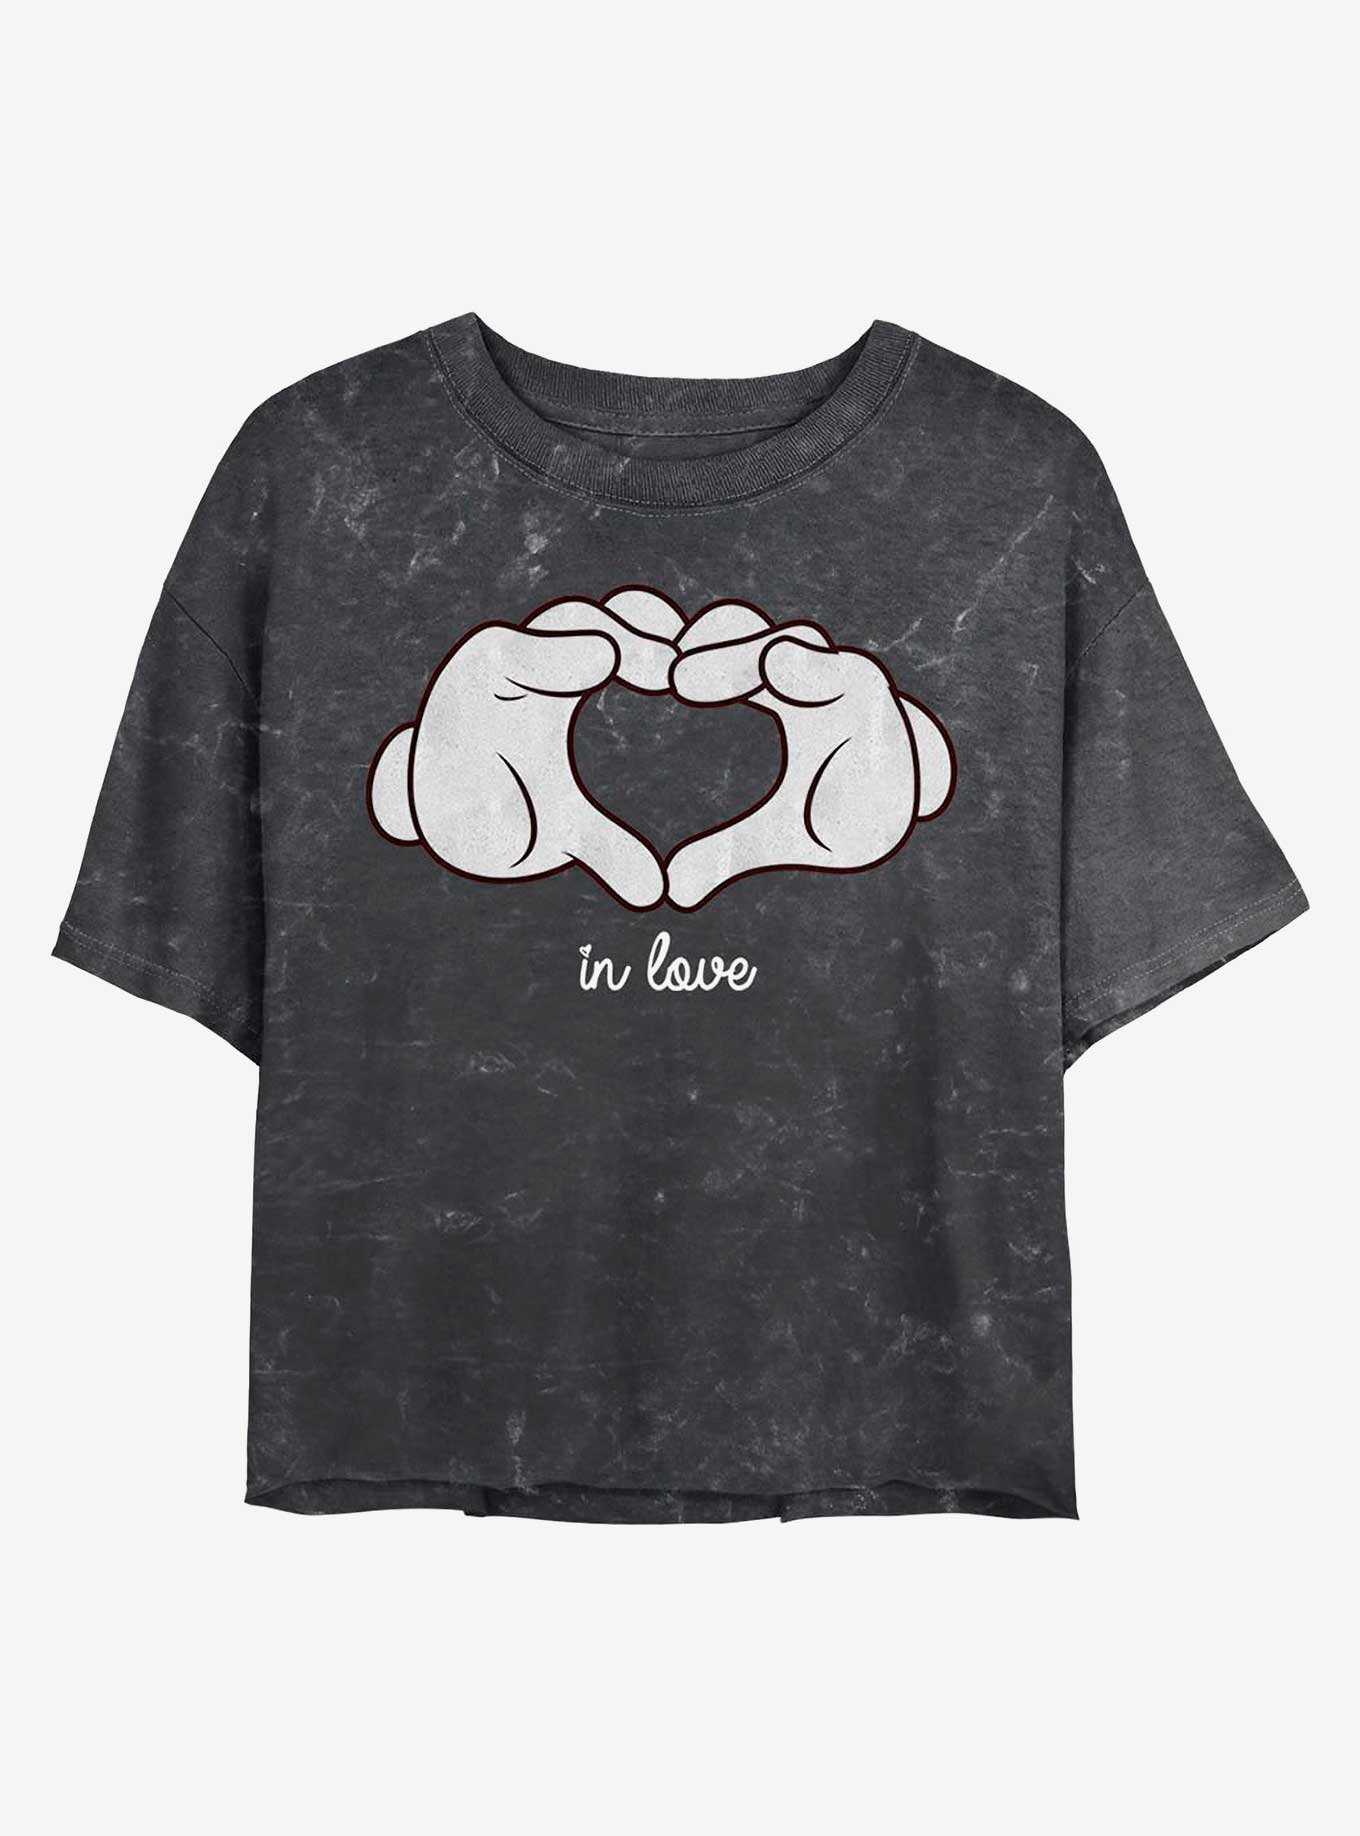 Disney Mickey Mouse Glove Heart Mineral Wash Crop Womens T-Shirt, , hi-res